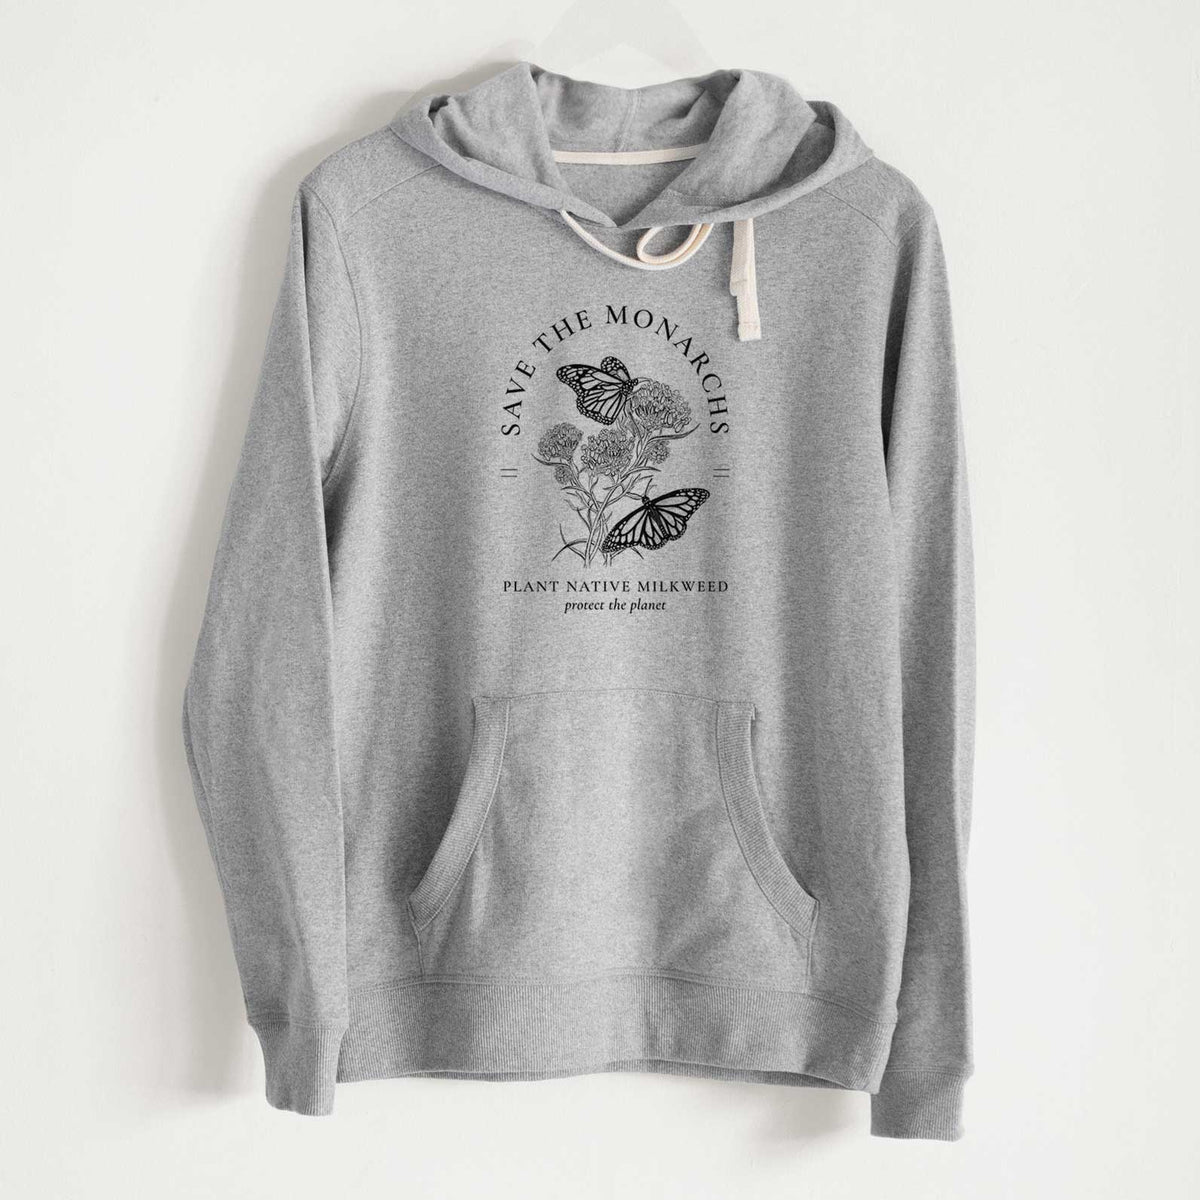 Save the Monarchs - Plant Native Milkweed - Unisex Recycled Hoodie - CLOSEOUT - FINAL SALE